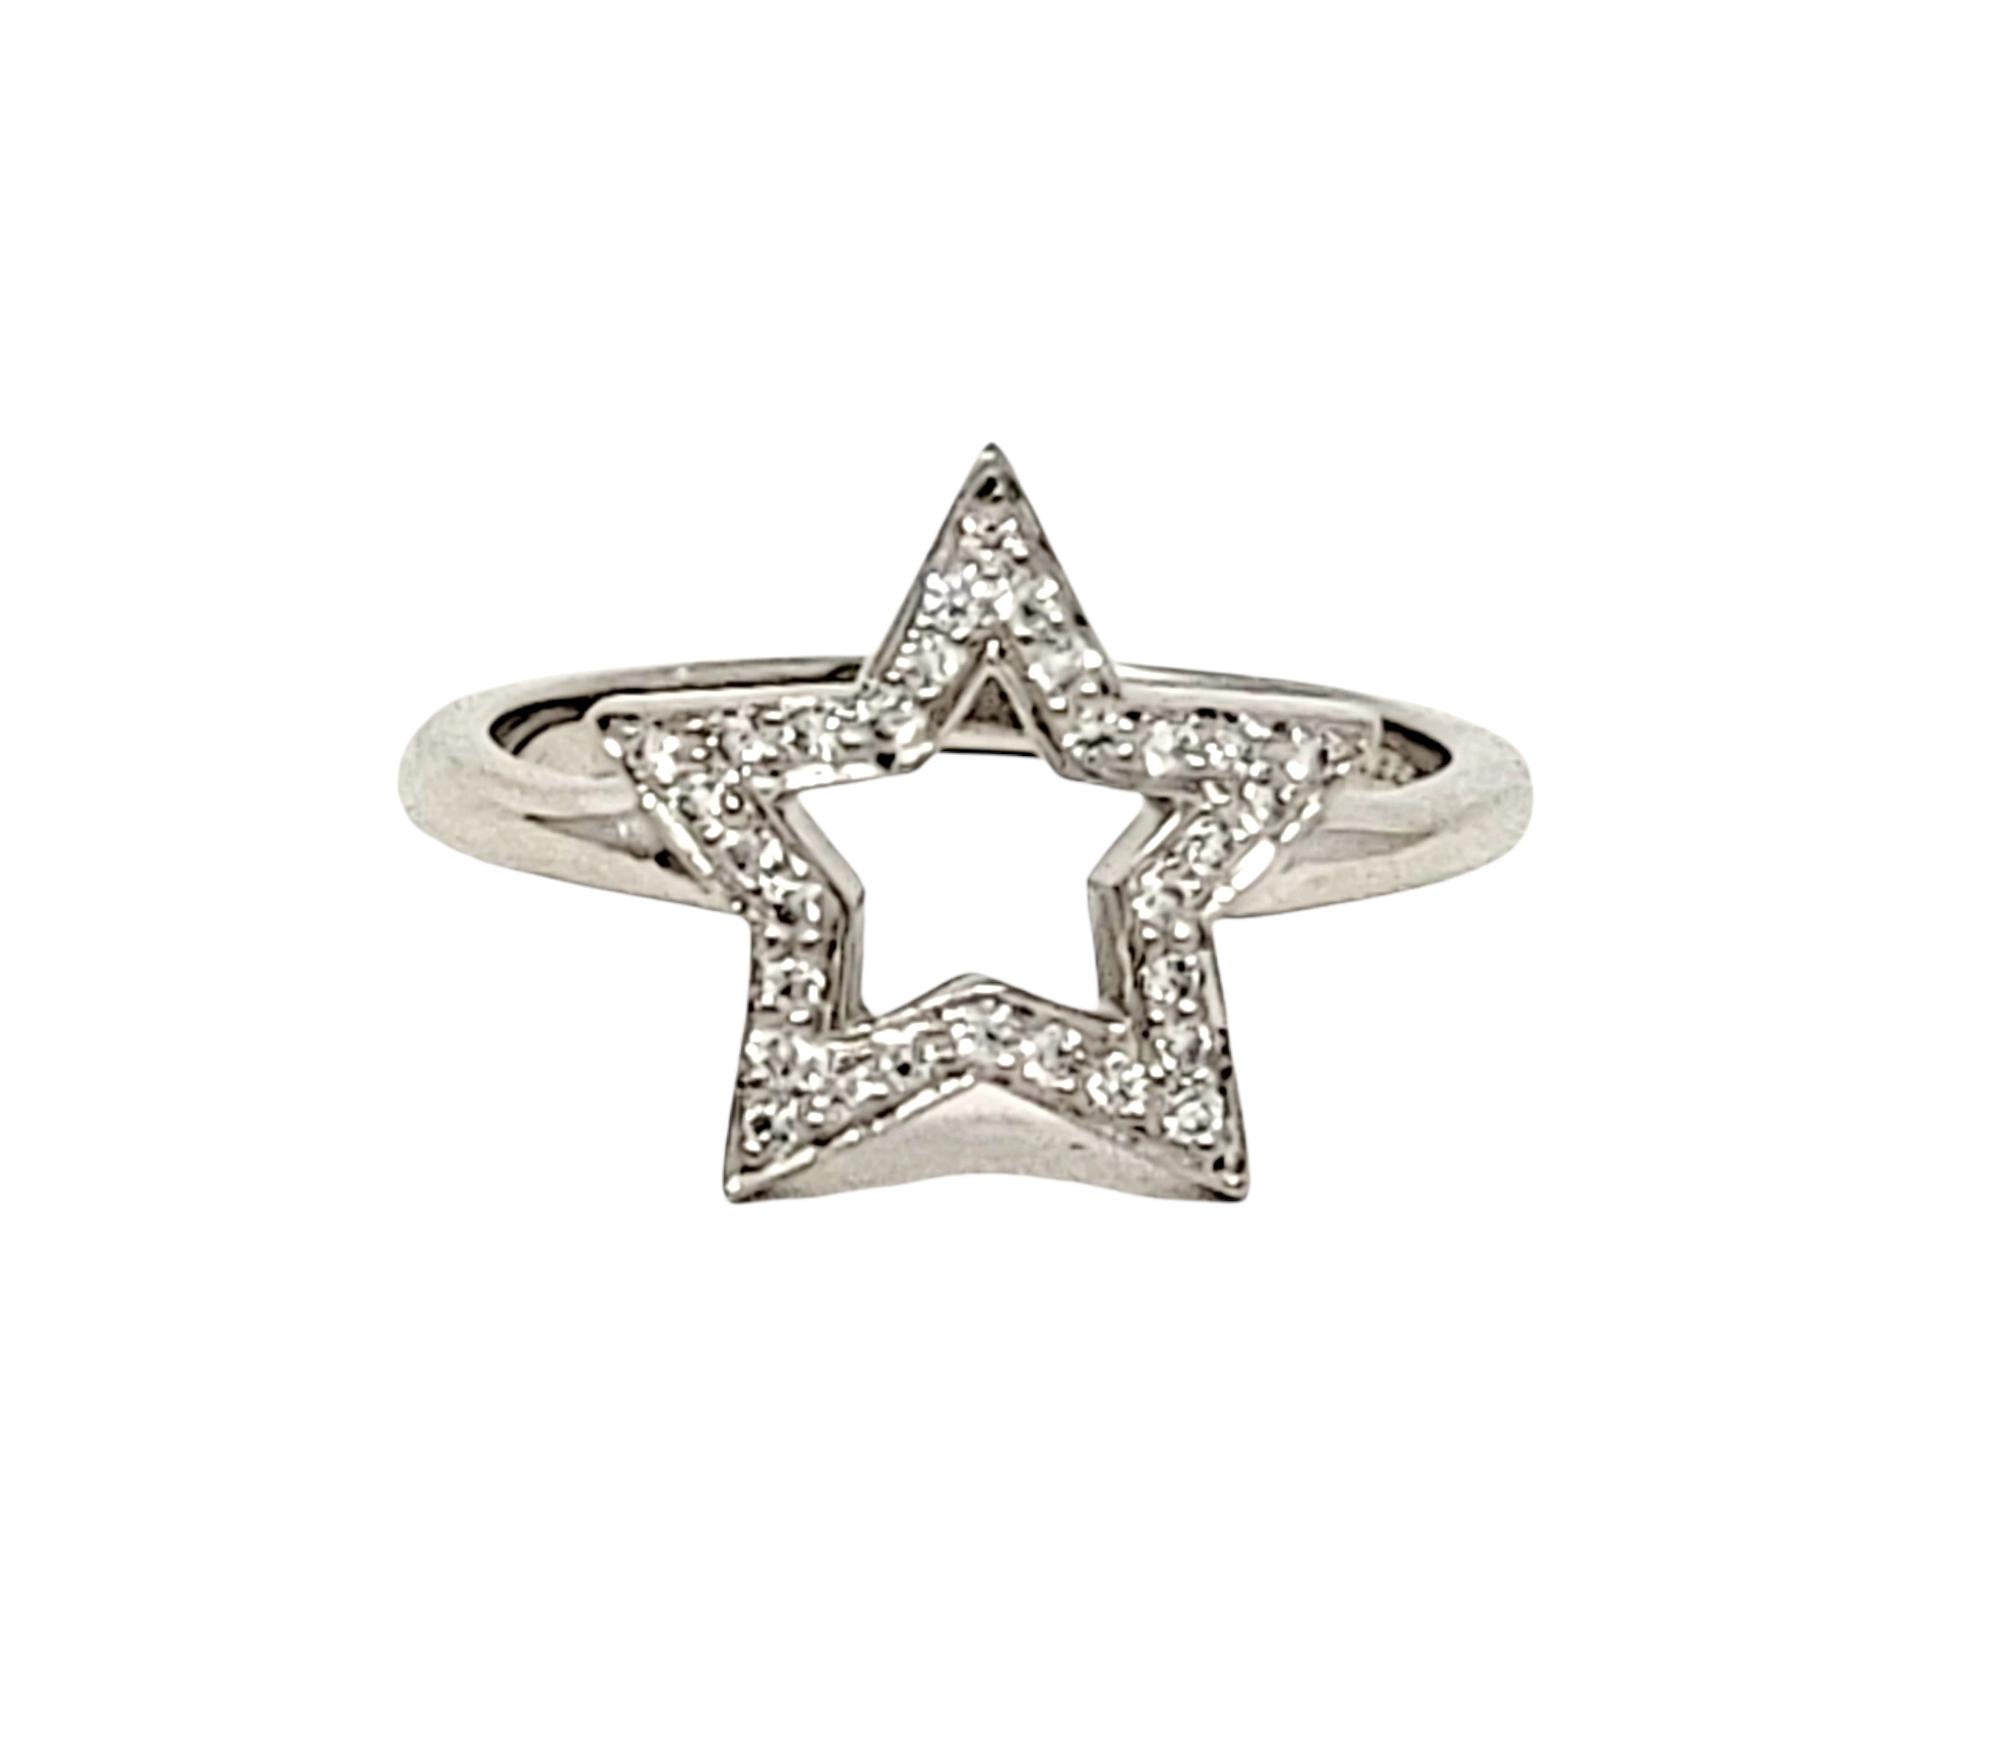 Ring size: 3.5

This lovely and delicate Tiffany star ring will stand the test of time. The timeless design features a single 5 point star on a thin platinum band. The star is embellished with .10 carats of sparkling round pave diamonds, F-G in